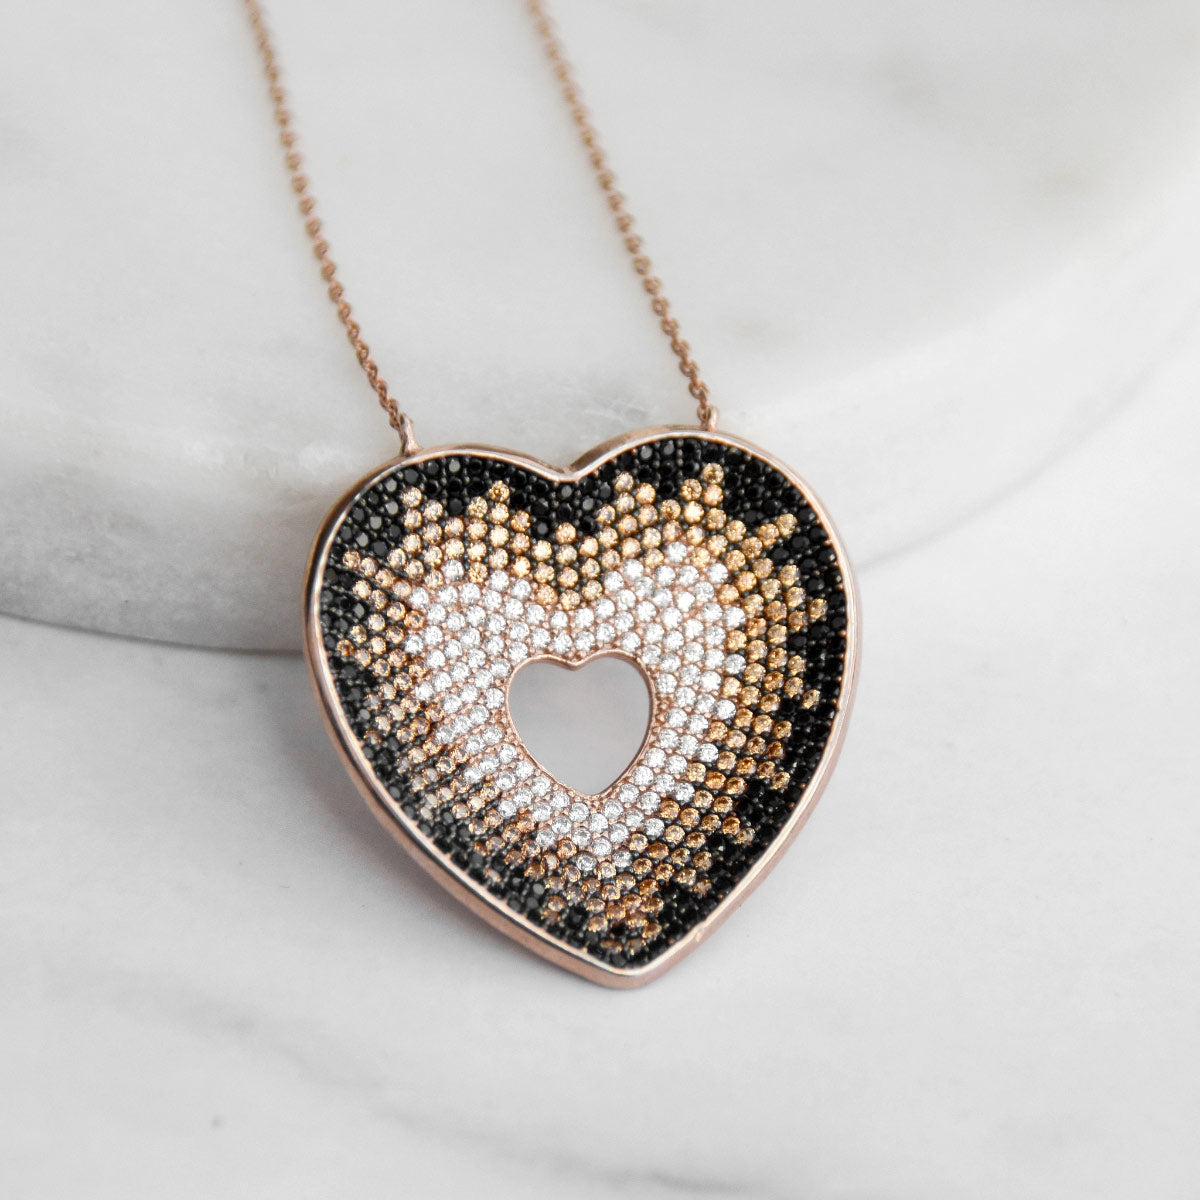 To My Wife, I Want to Hold Your Hand (Gold Card) - Black Crystal Heart Necklace Gift Set